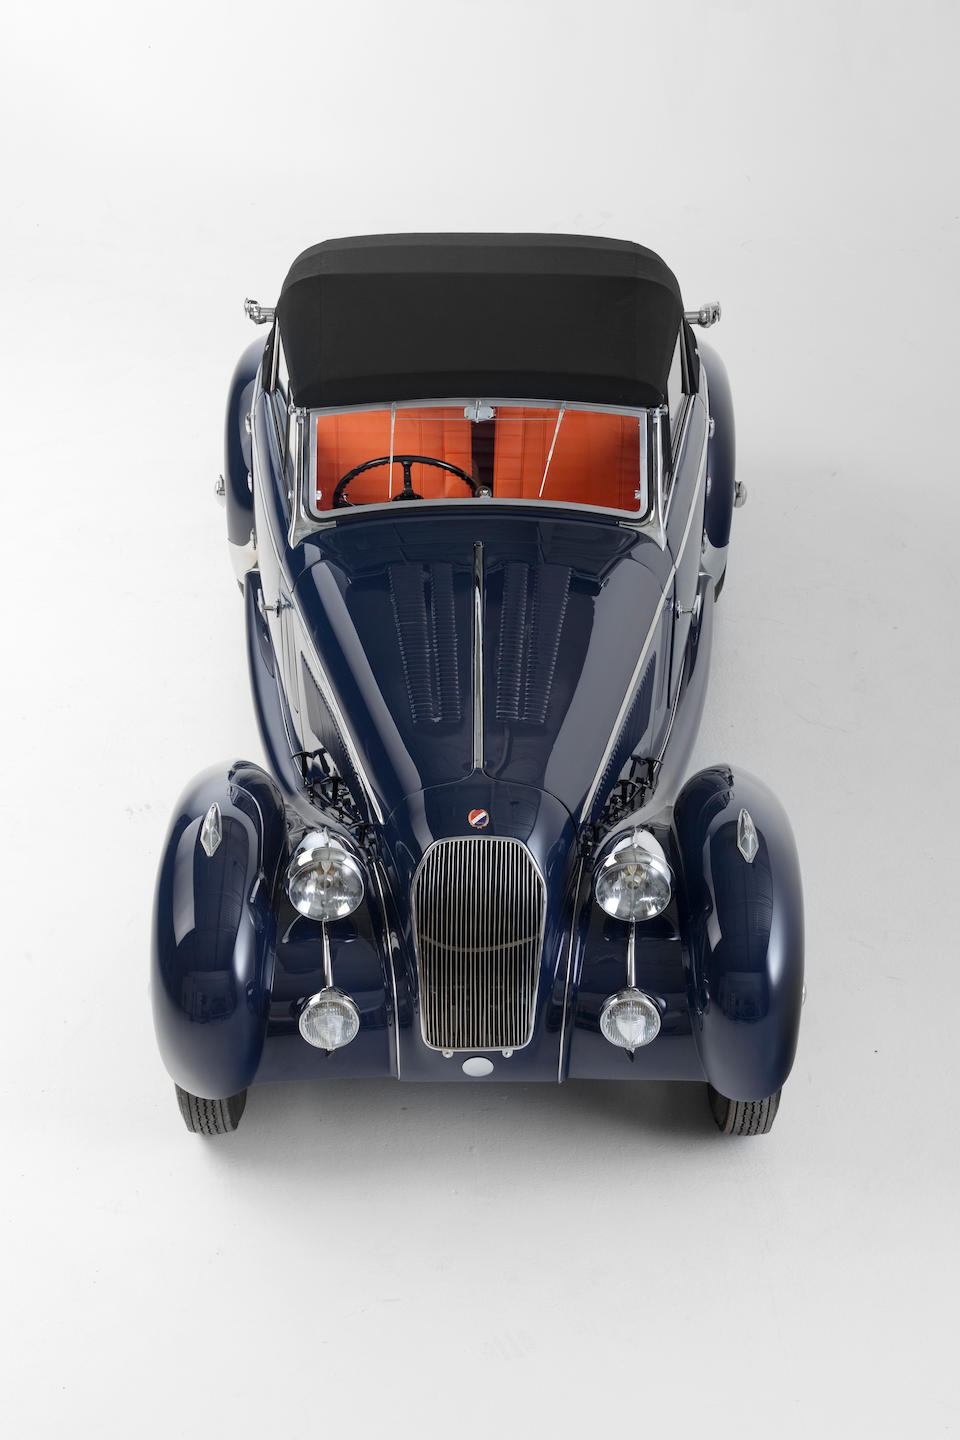 <b>1938 TALBOT-LAGO T150C 'Lago Sp&#233;ciale' Cabriolet</b><br />Chassis no. 90039